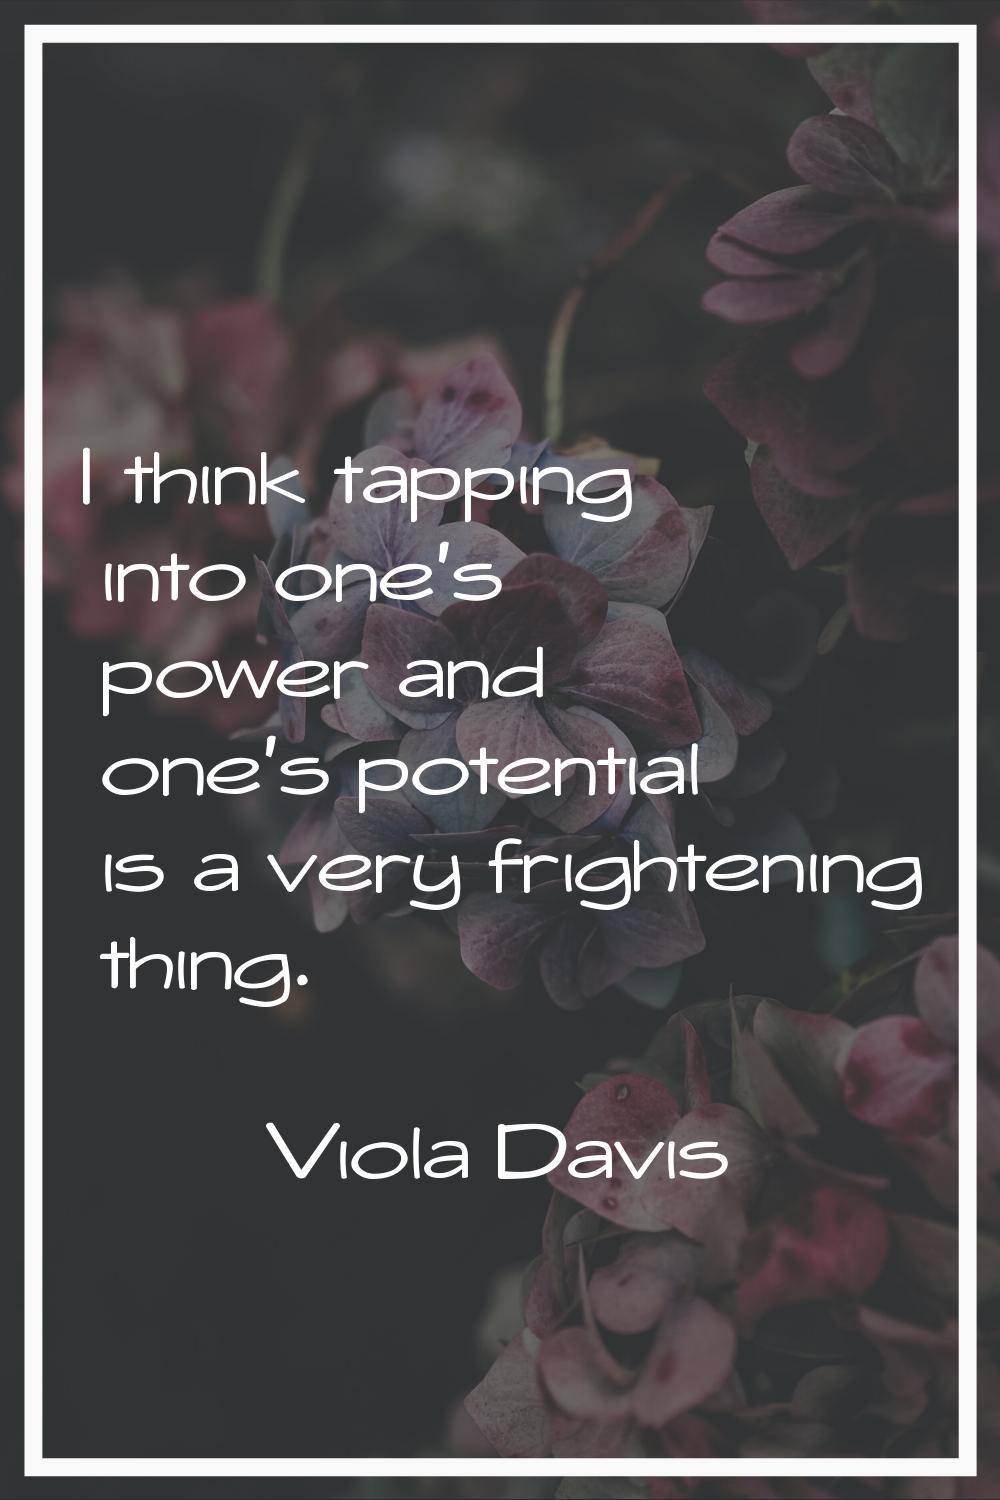 I think tapping into one's power and one's potential is a very frightening thing.